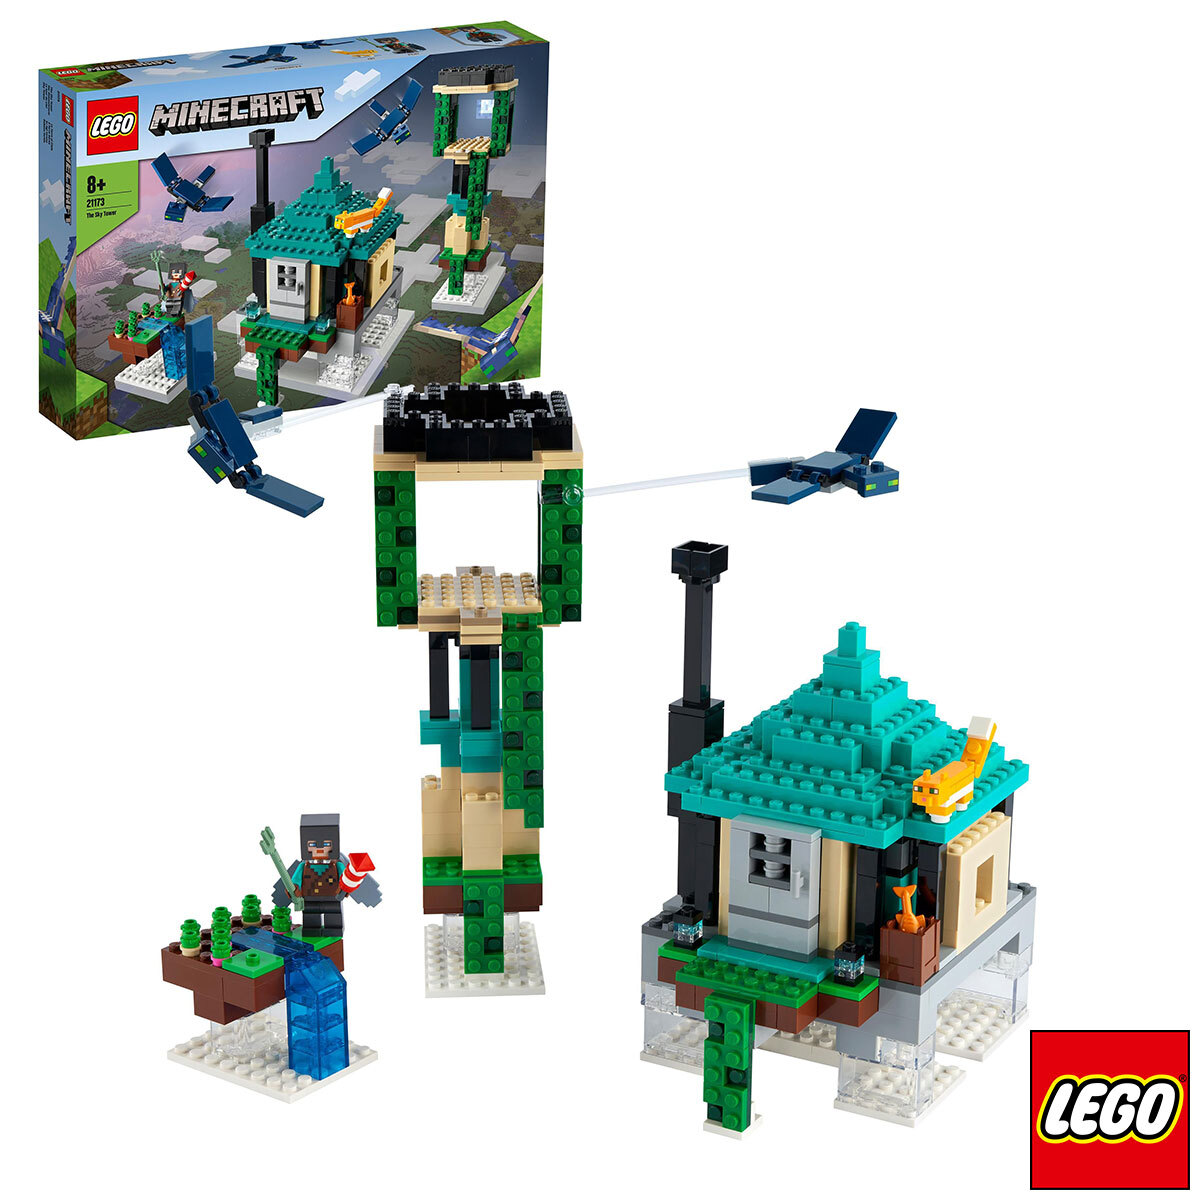 Buy LEGO Minecraft The Sky Tower Box & Product Image at costco.co.uk